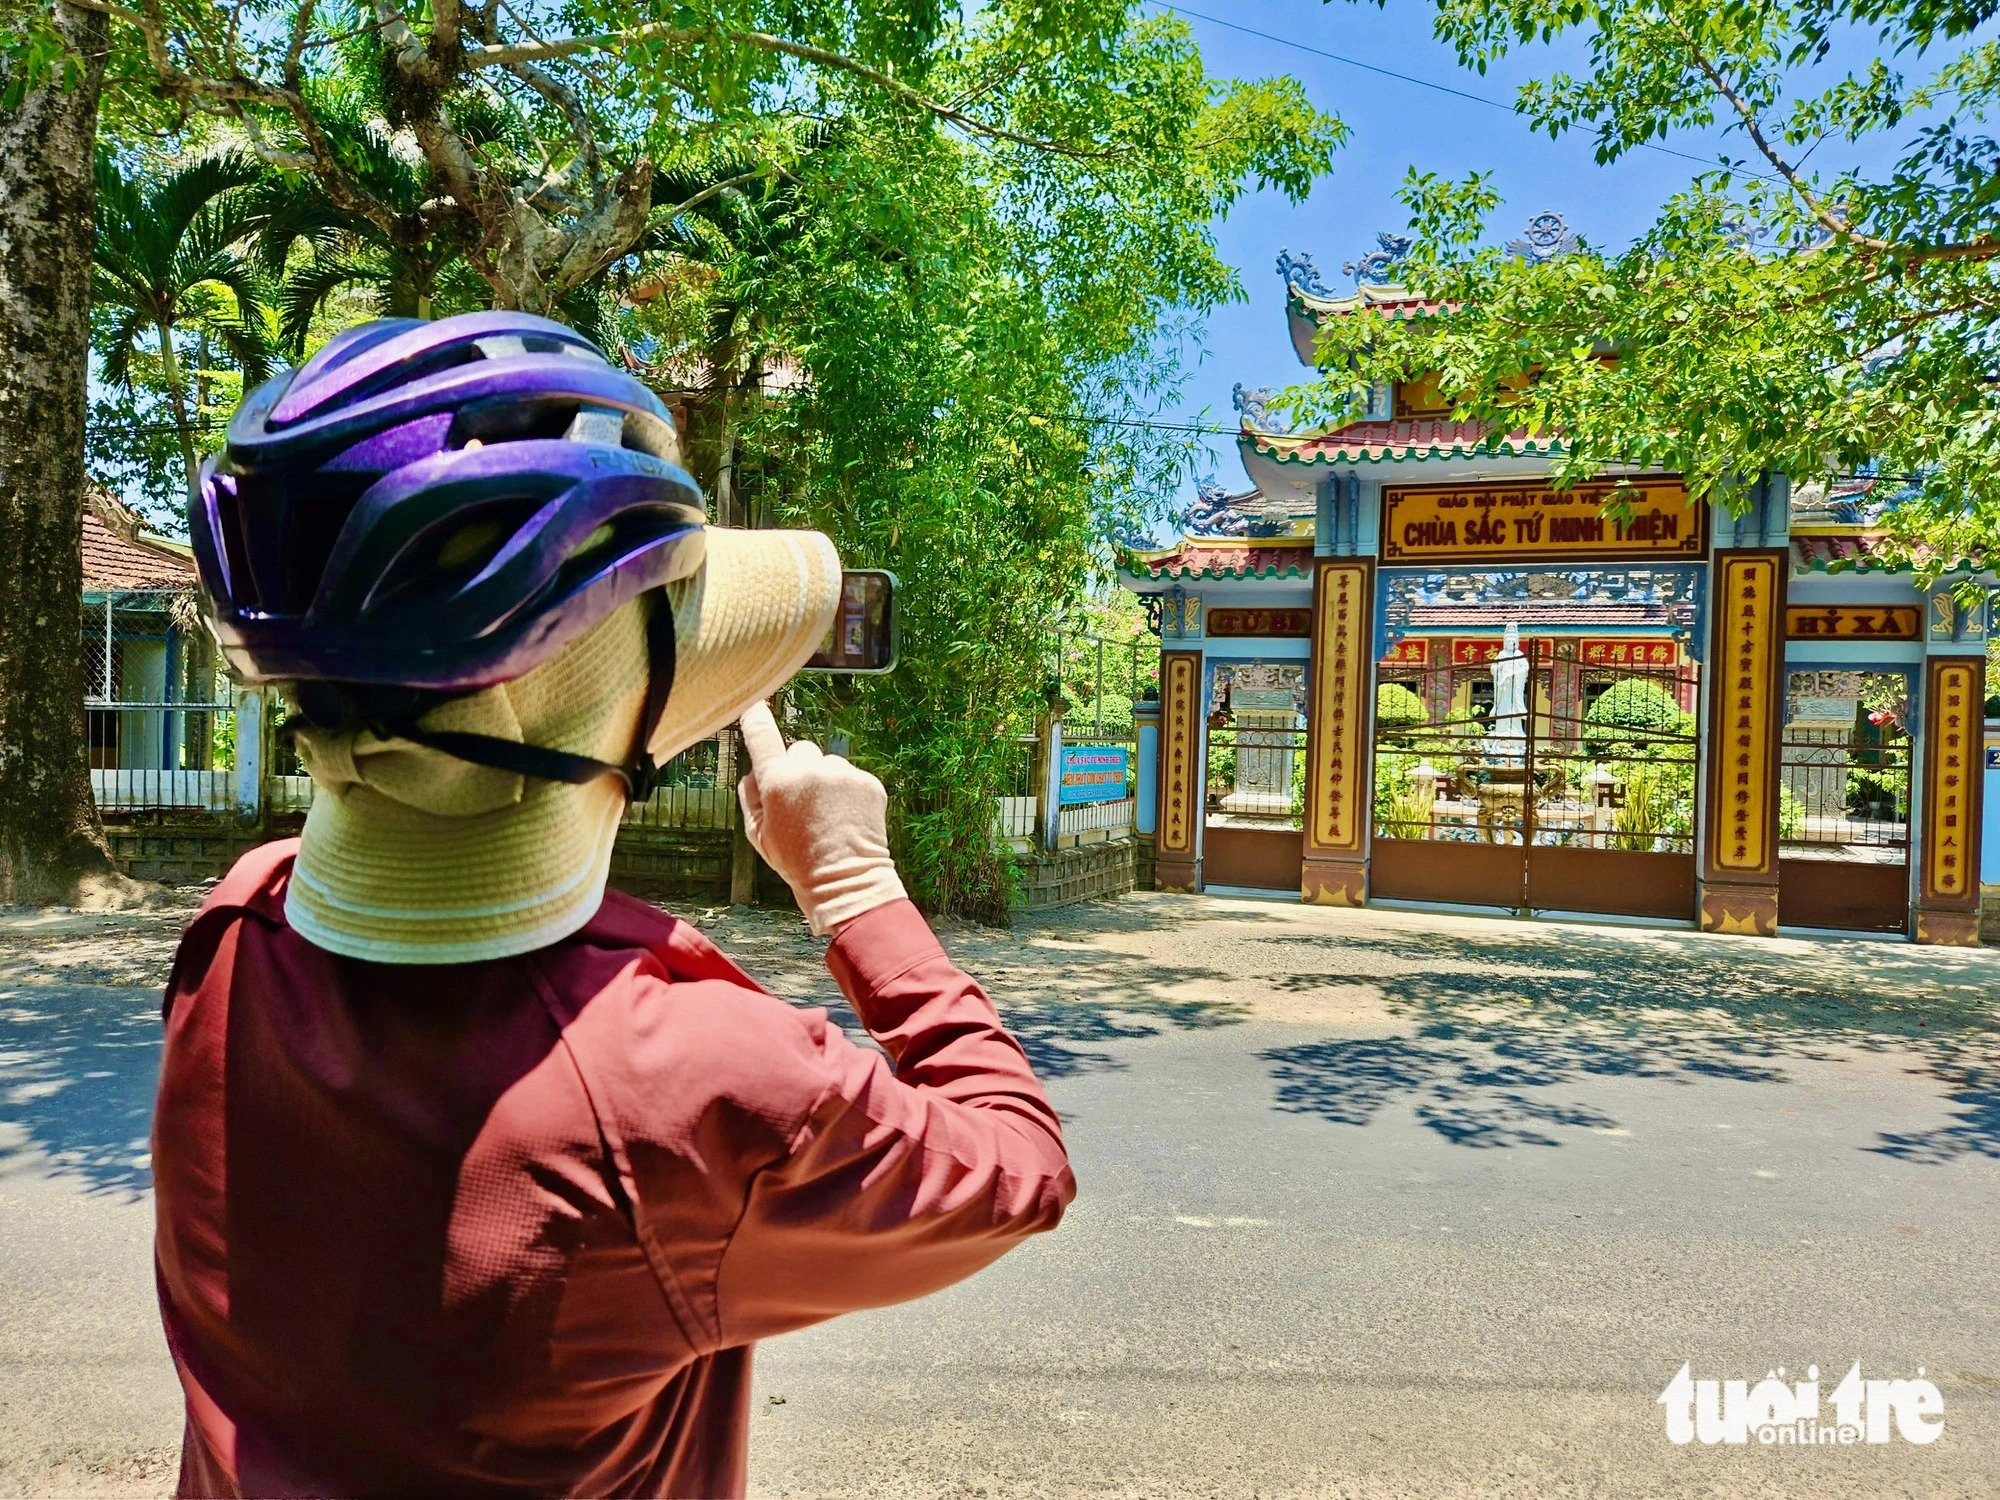 A foreign visitor photographs a pagoda in a rural area of Nha Trang City, Khanh Hoa Province, south-central Vietnam. Photo: Minh Chien / Tuoi Tre